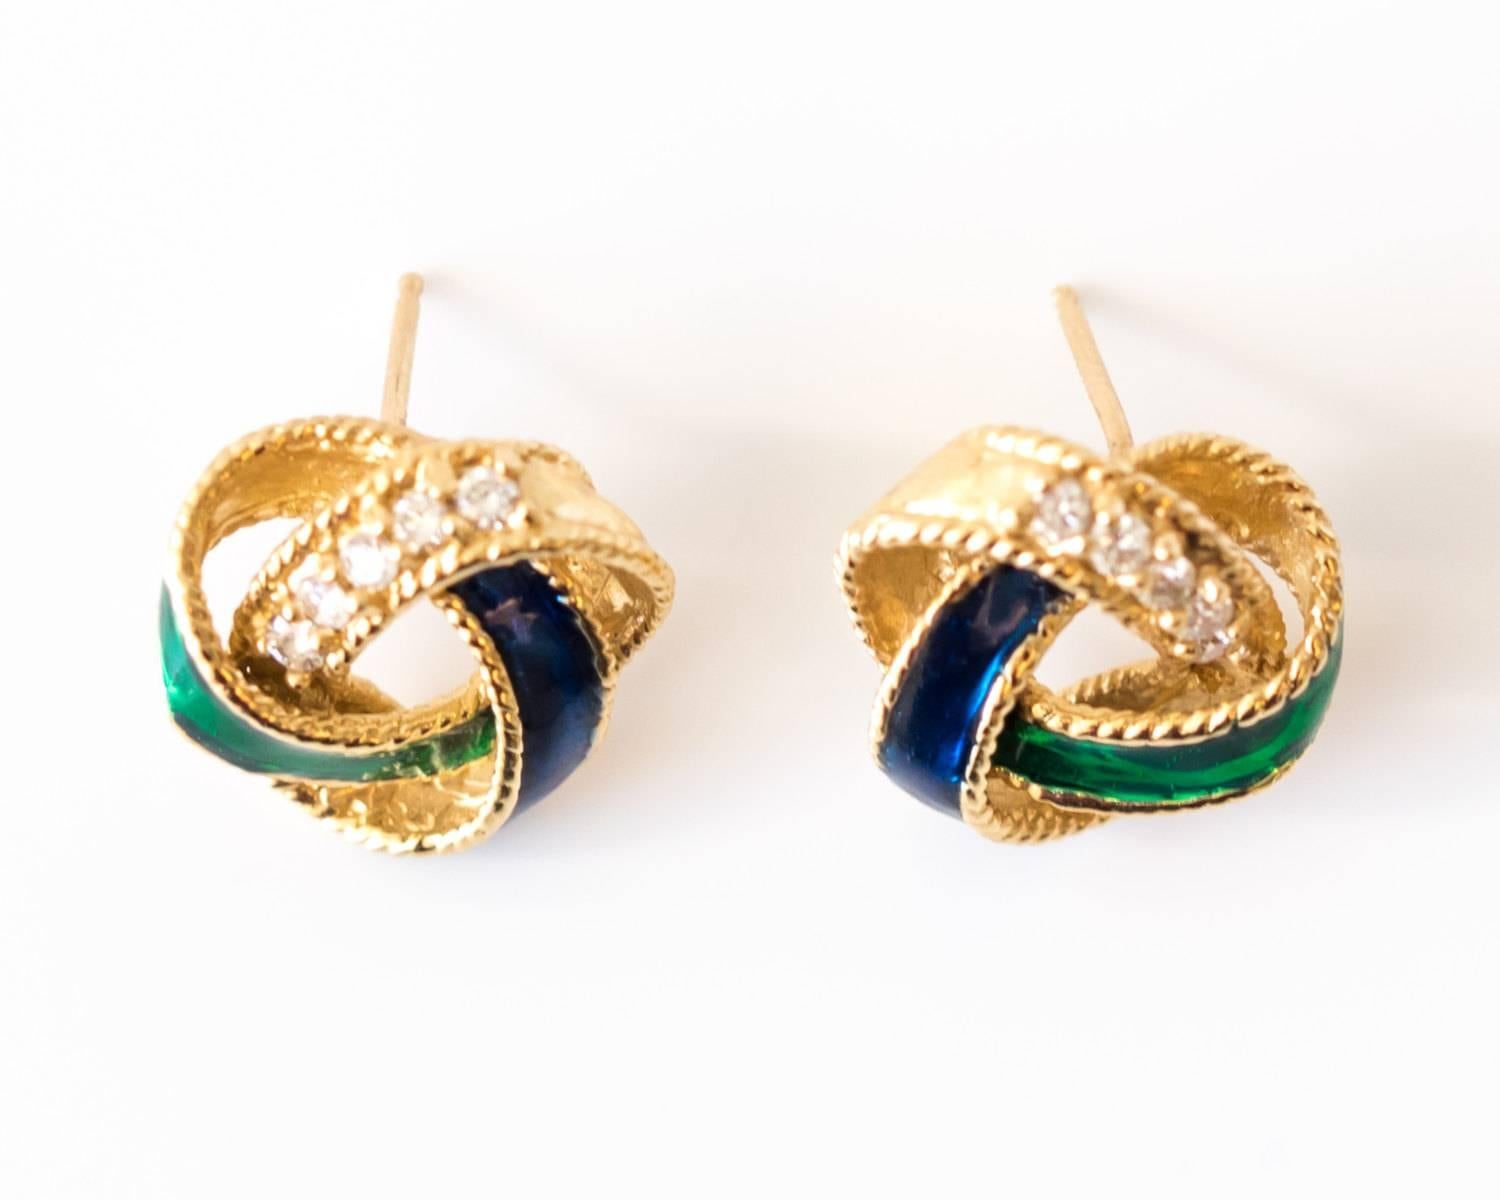 Earring Details:
Metal Type: 14 karat Yellow Gold
Size: 15.5 mm
Weight: 6.65 g

Diamond Details:
Cut: Round
Carat Weight: .10 carat each x 2 = .20 carats total weight
Color: G
Clarity: VS

1950s 
Feature Blue and Green Enamel
